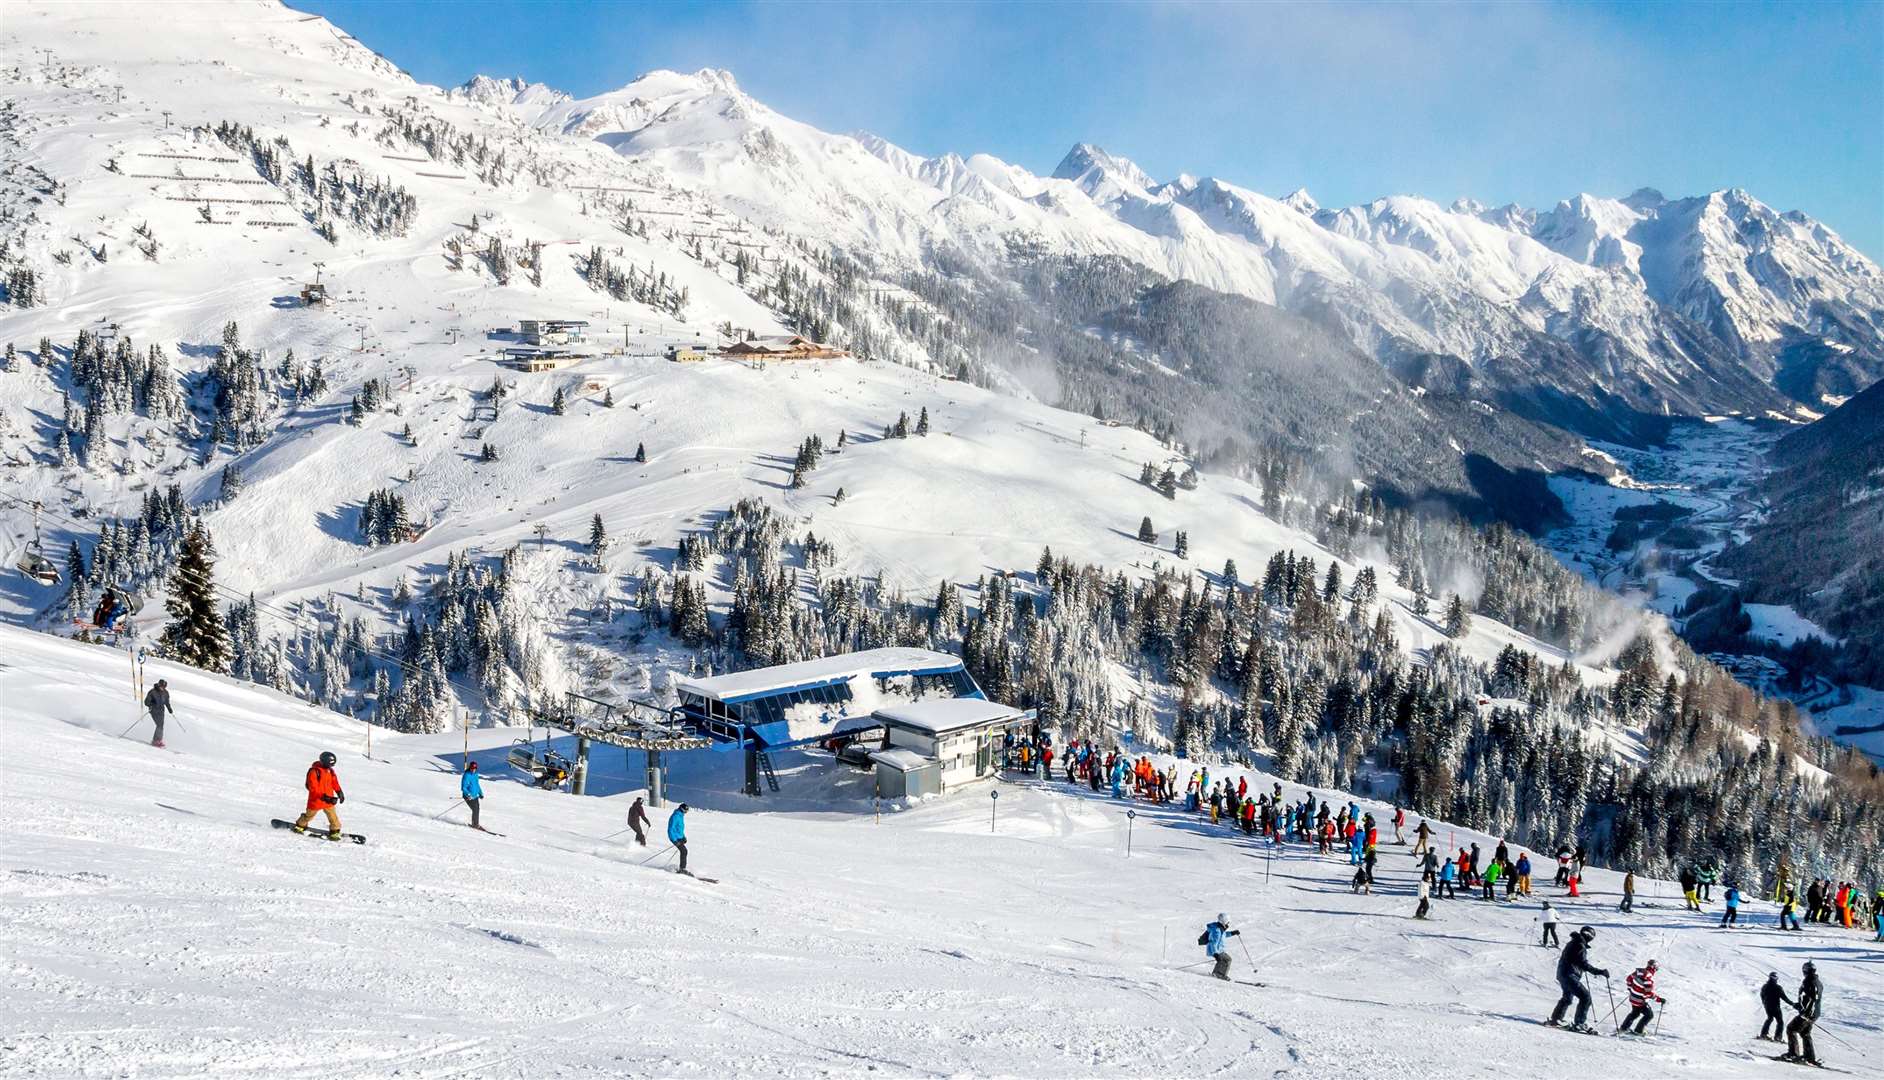 St. Anton is one of the most popular ski resorts in the Alps covering a vast area across Lech.